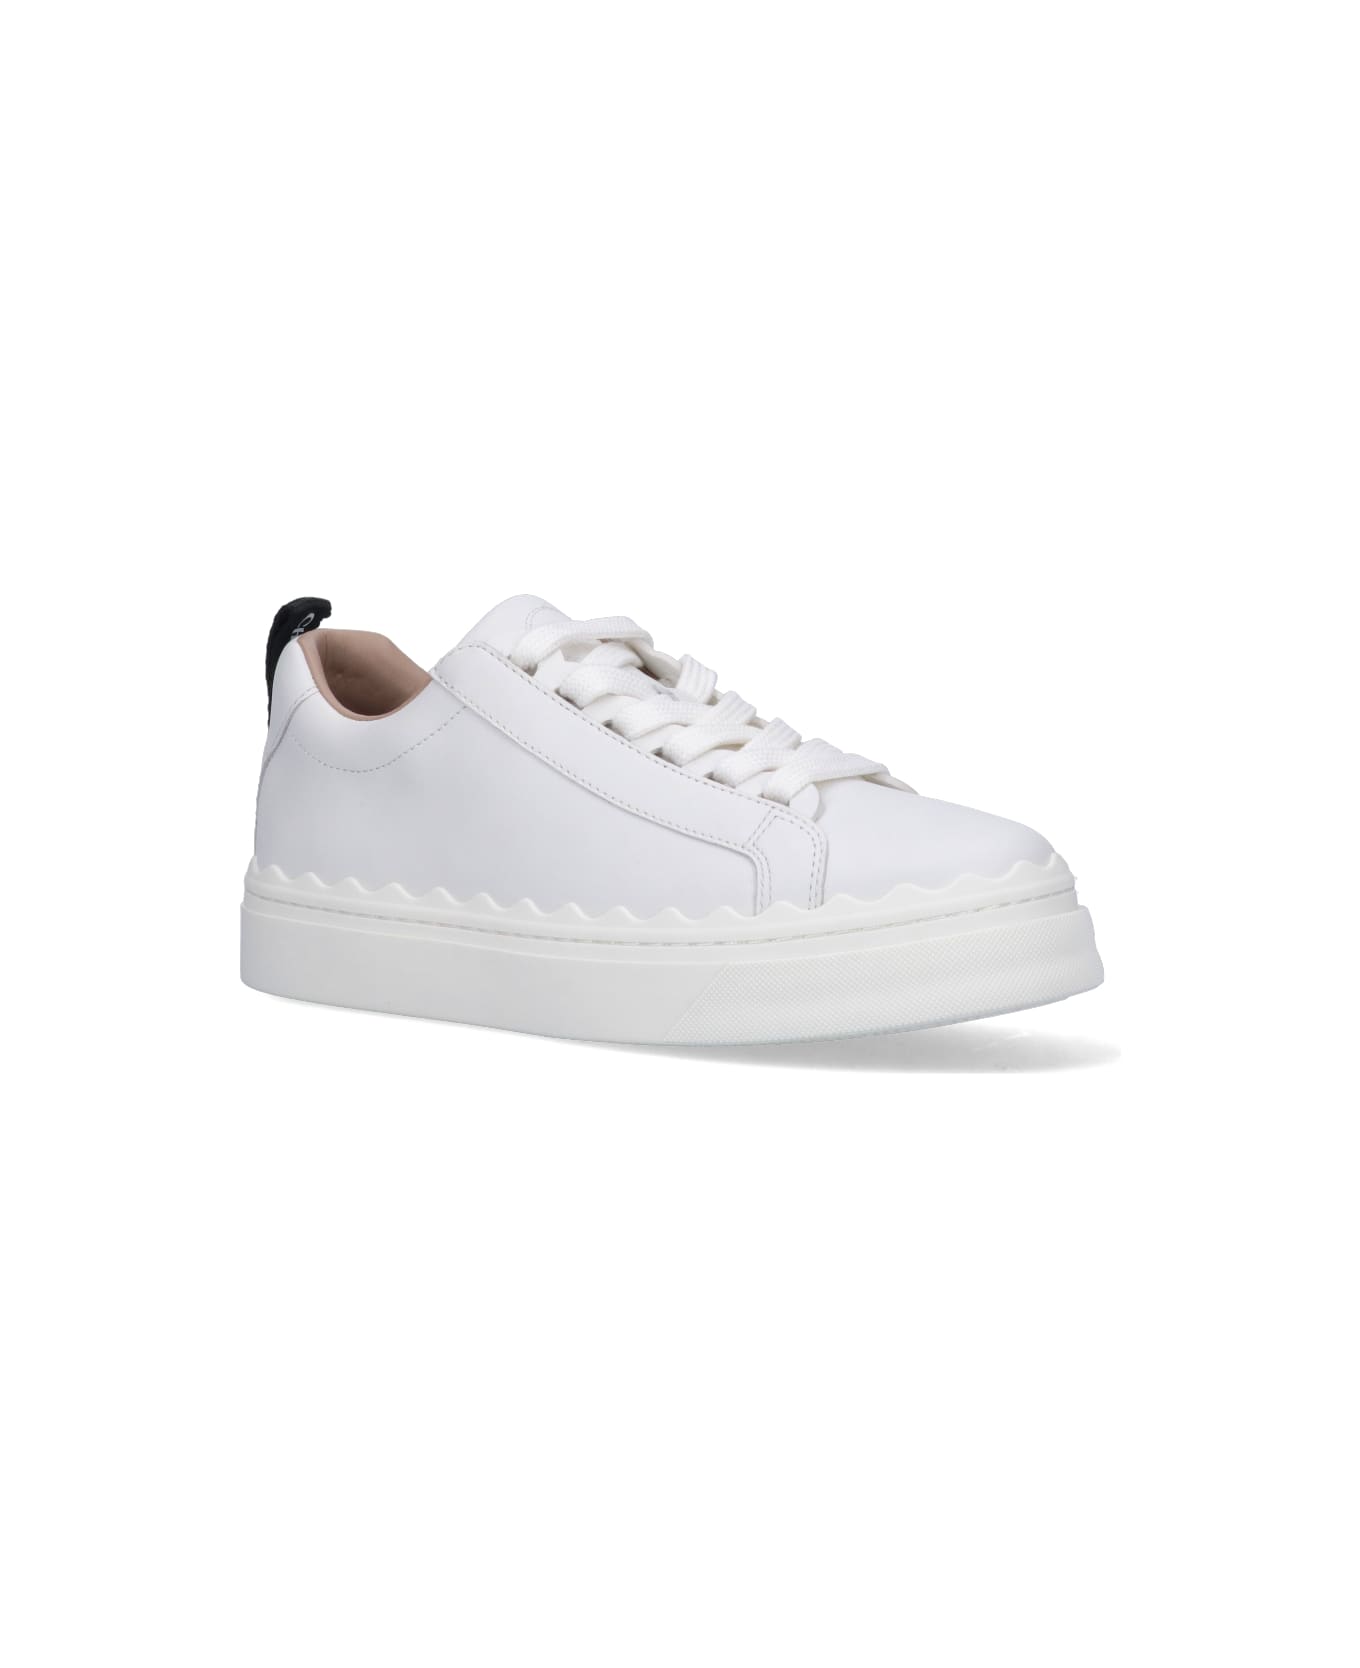 Chloé Lauren Sneakers In White Leather - Bianco